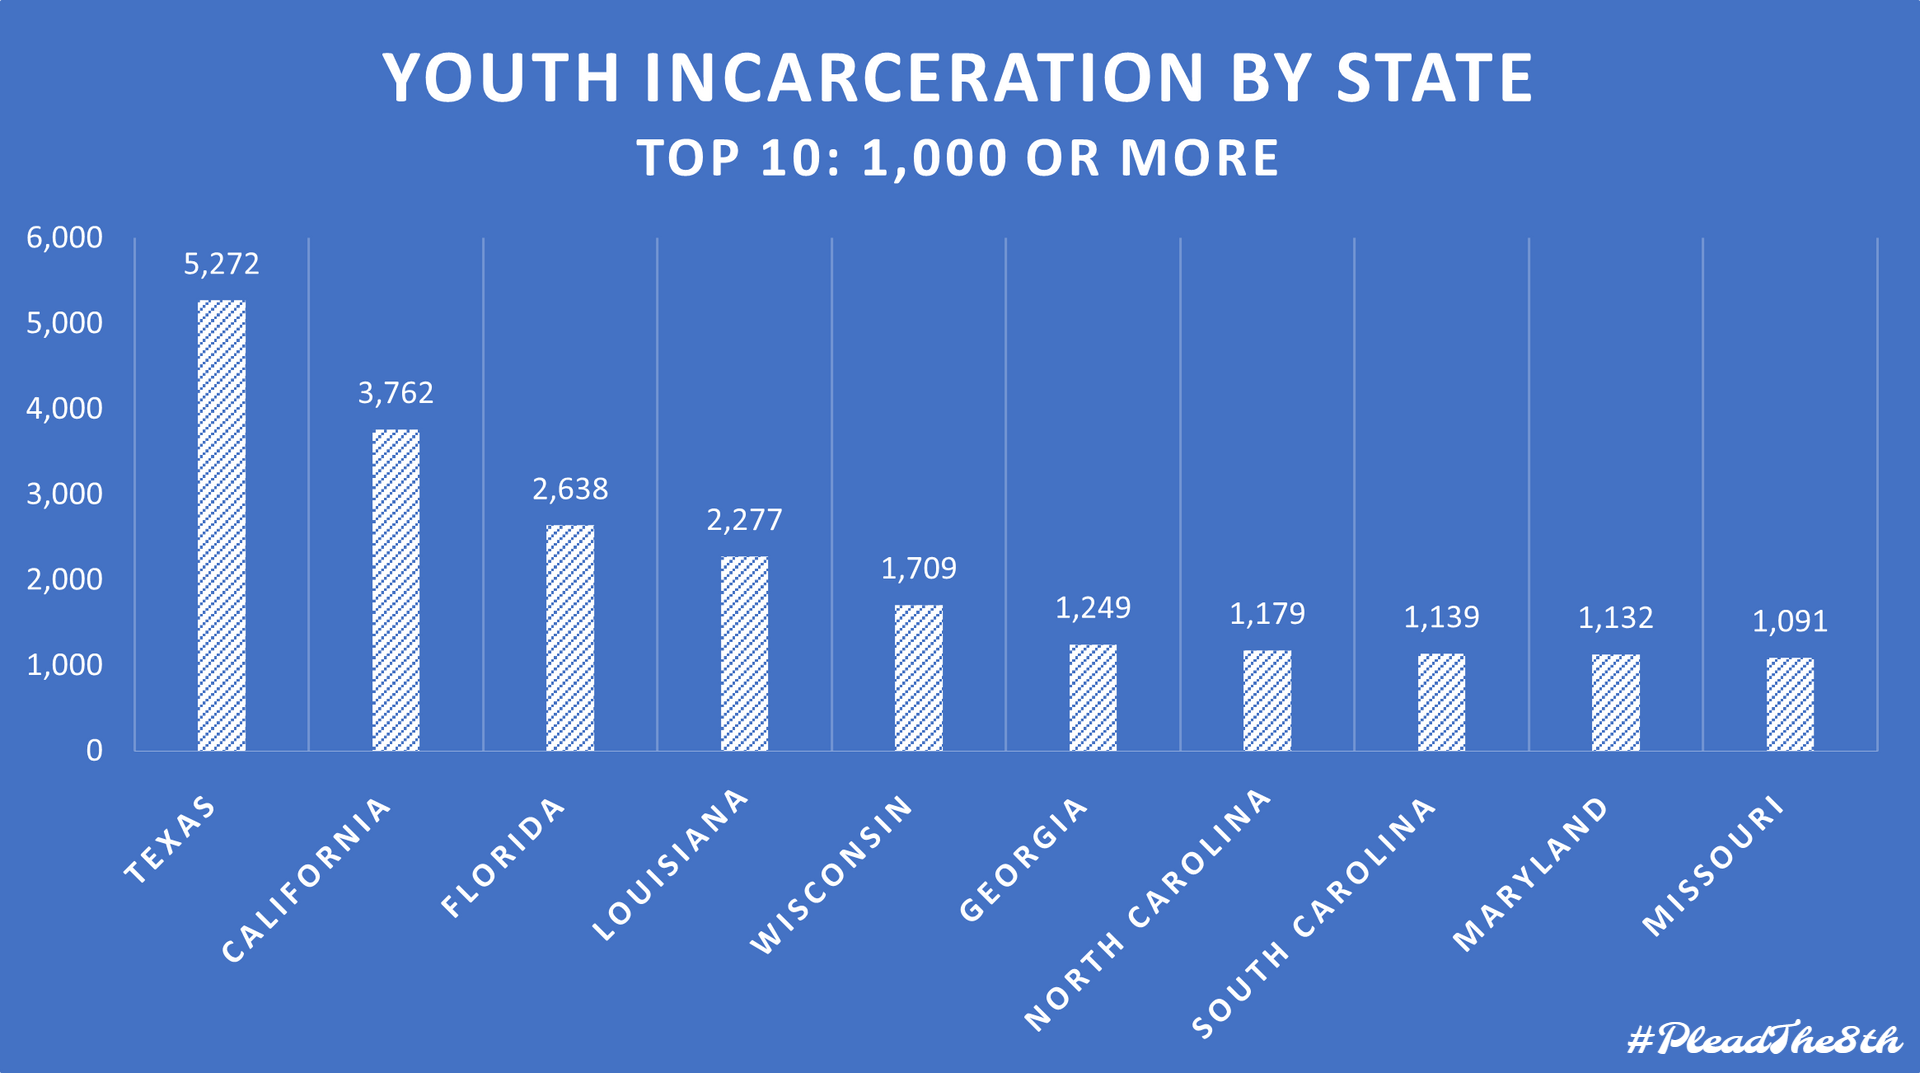 Youth incarceration by state